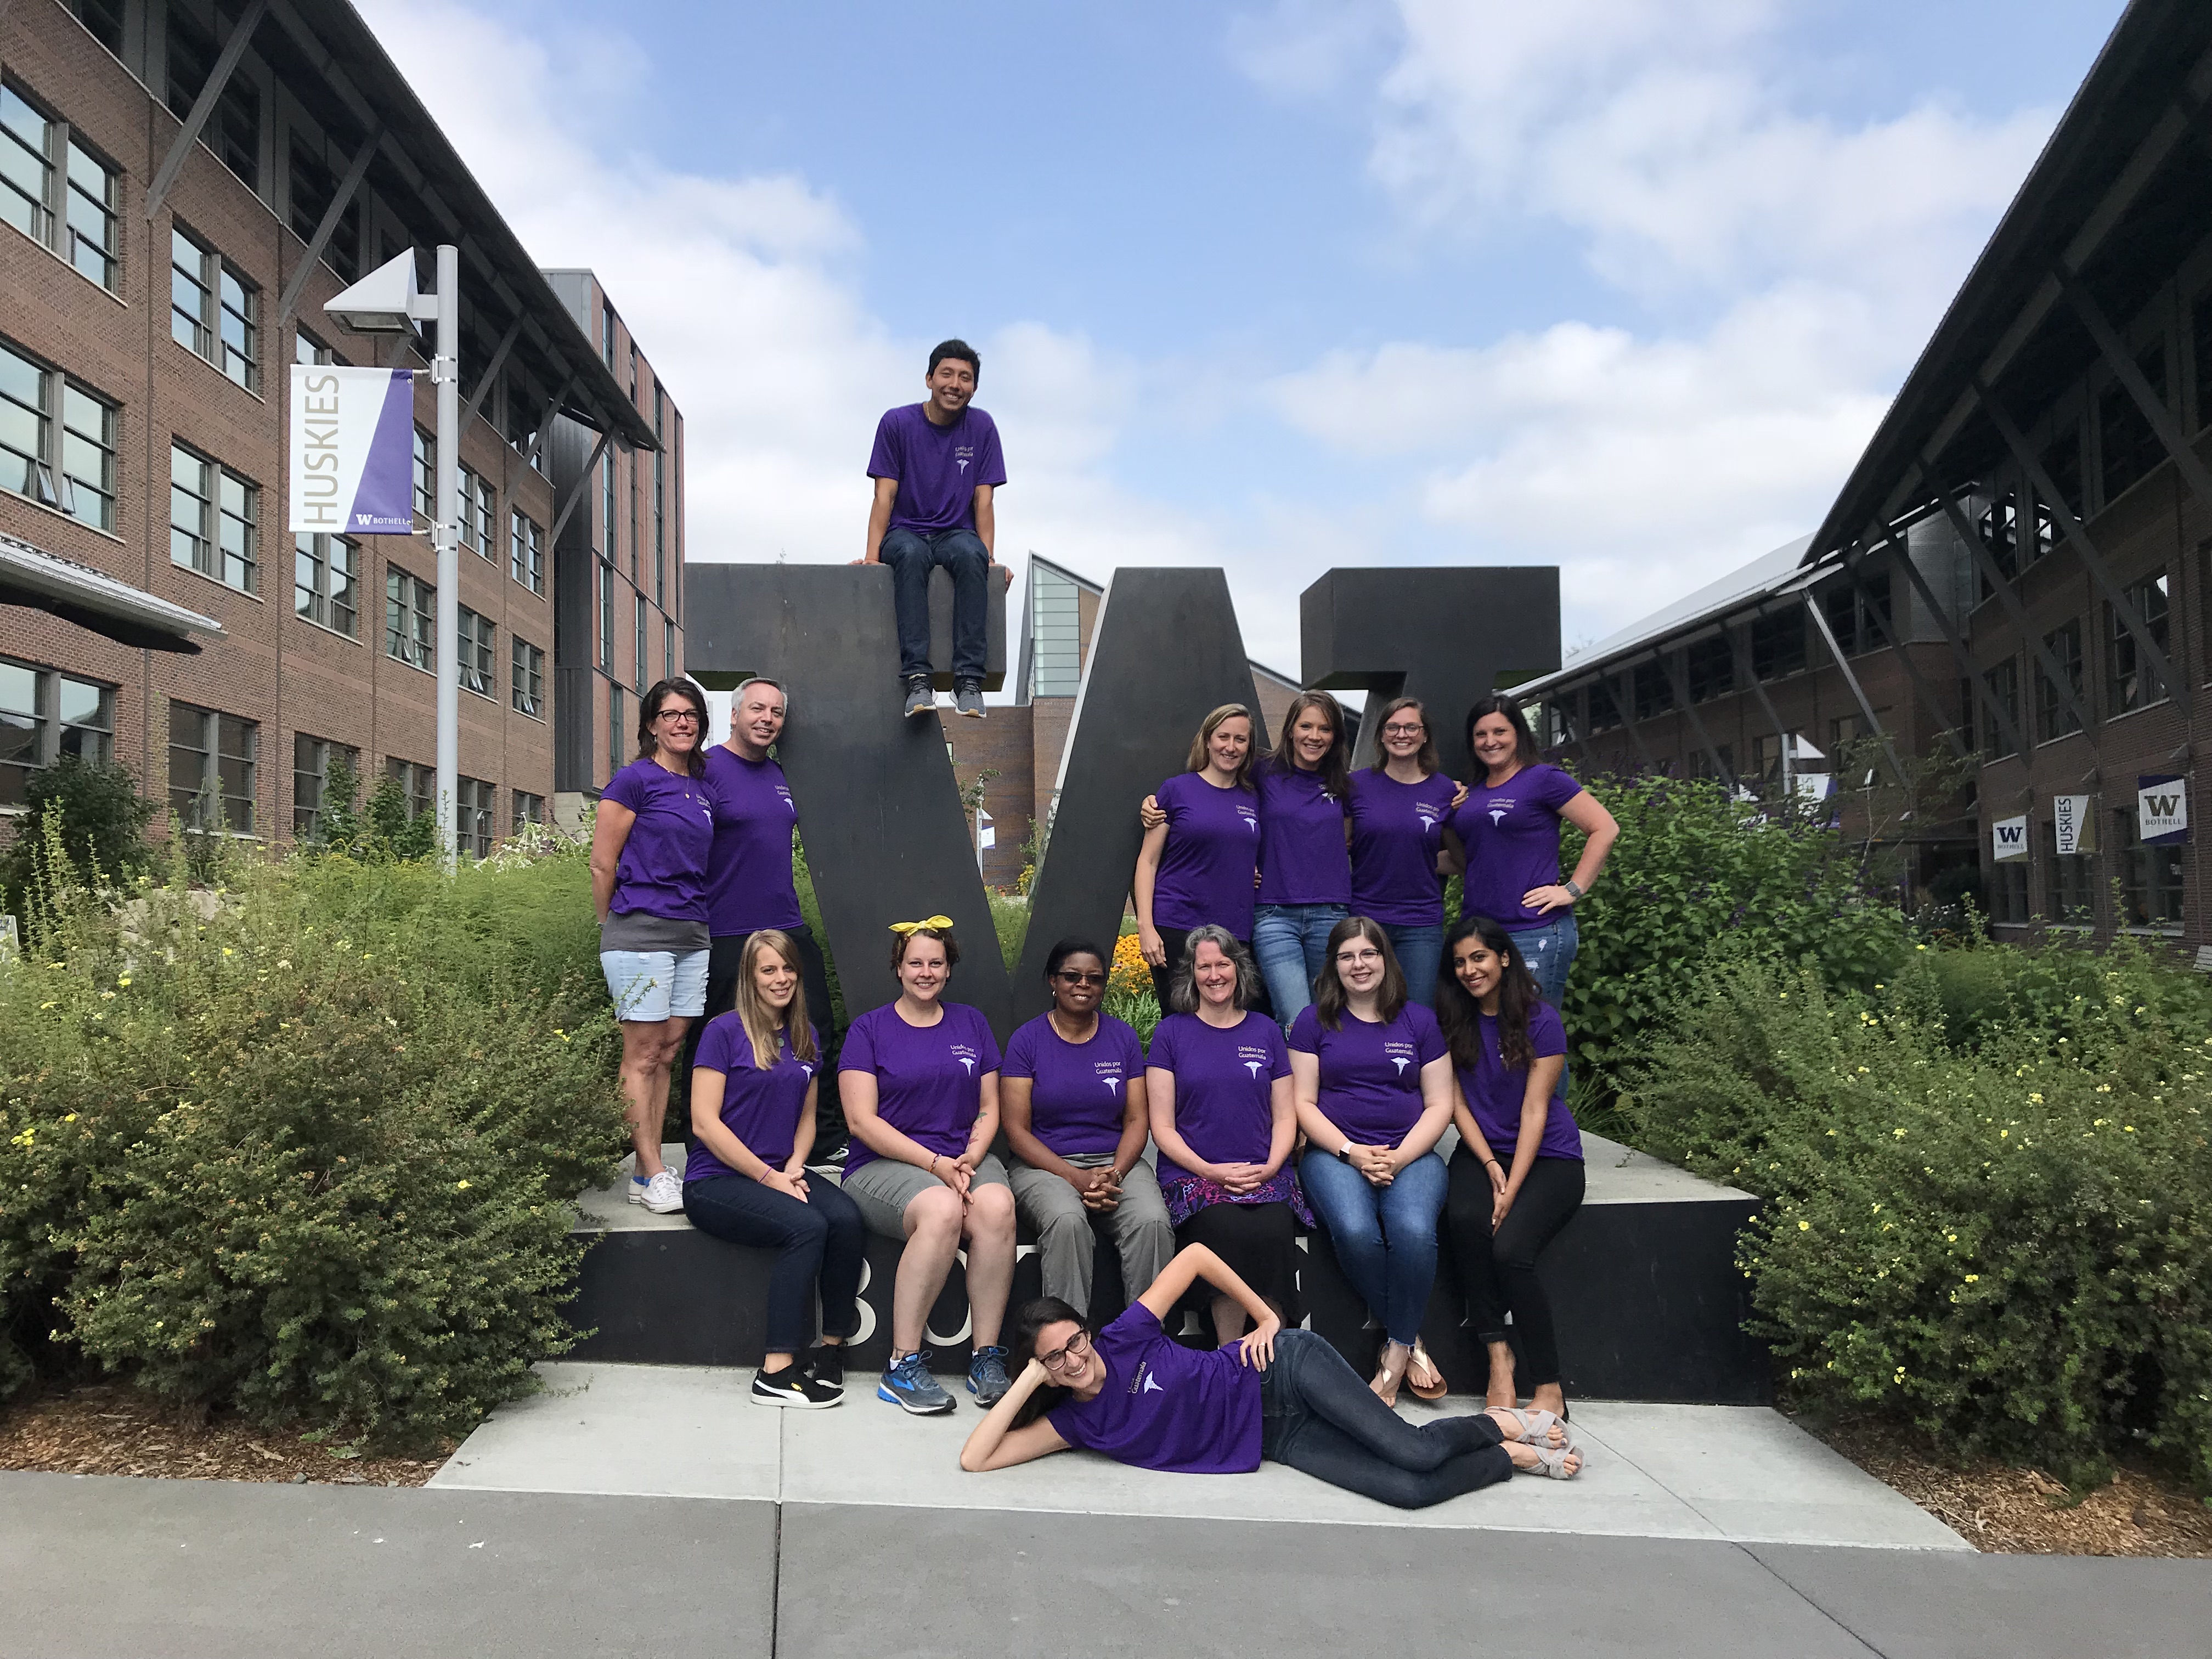 Team Guatemala returned from a study abroad trip in Summer 2018 to pose in front of the UW Bothell "W" Sign on campus.